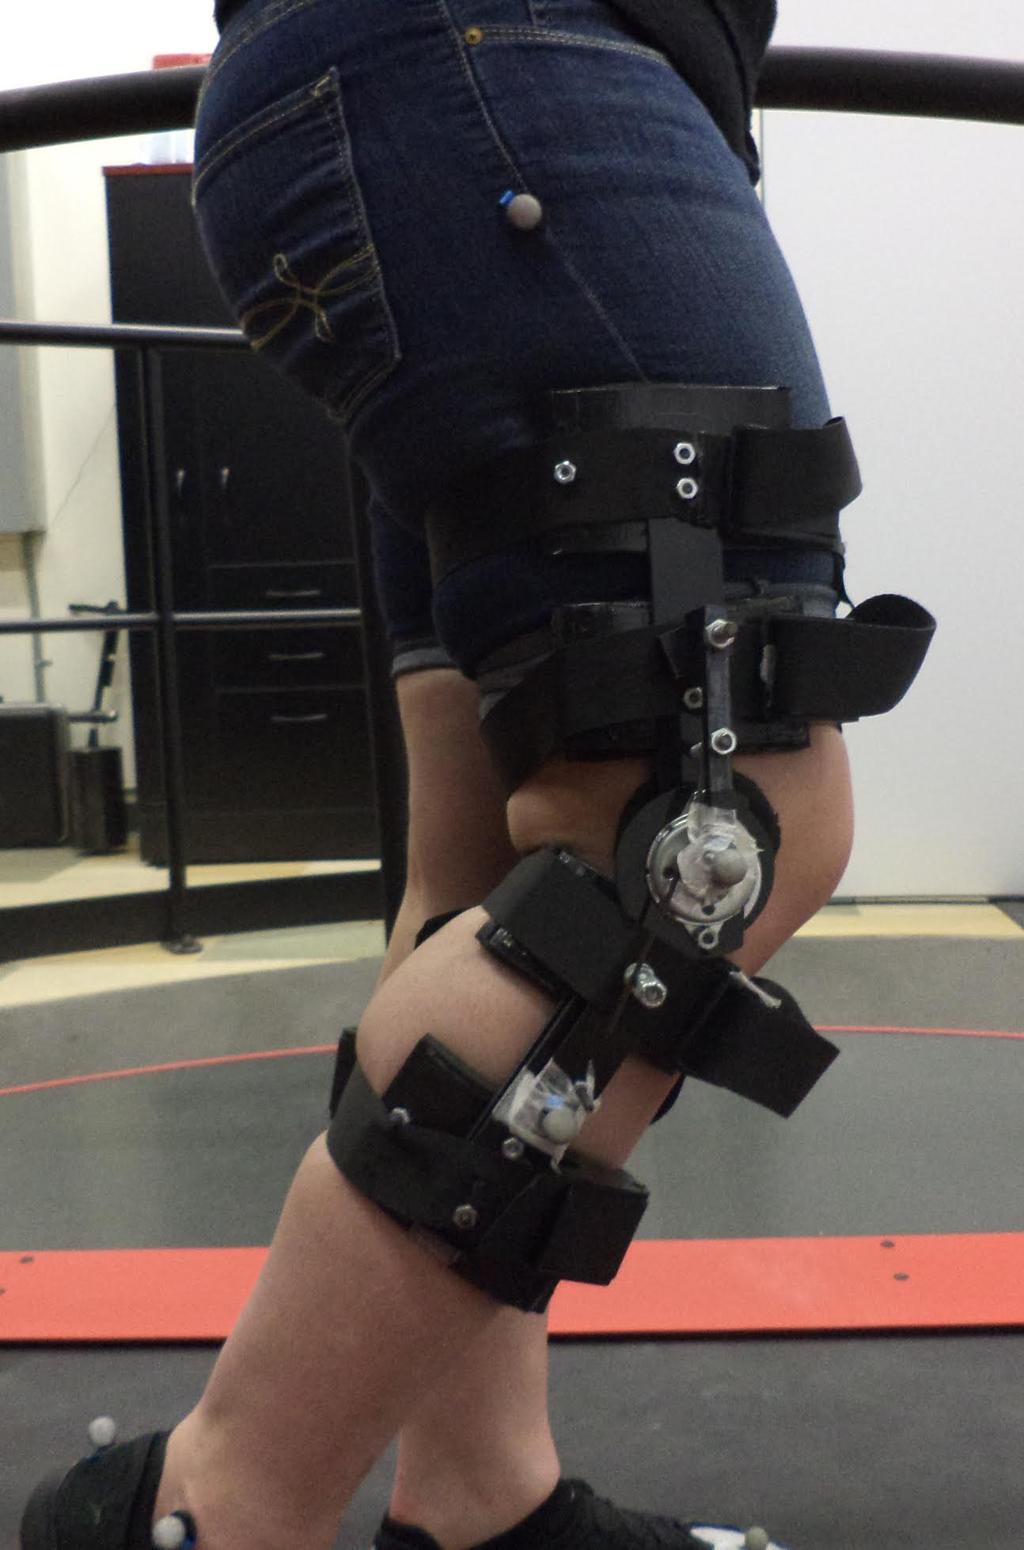 Figure 4.1: Stroke Simulator on a Subject. effects. In this preliminary experiment, I study the effects of one of the various combinations of damping and stiffness on the knee orthosis.